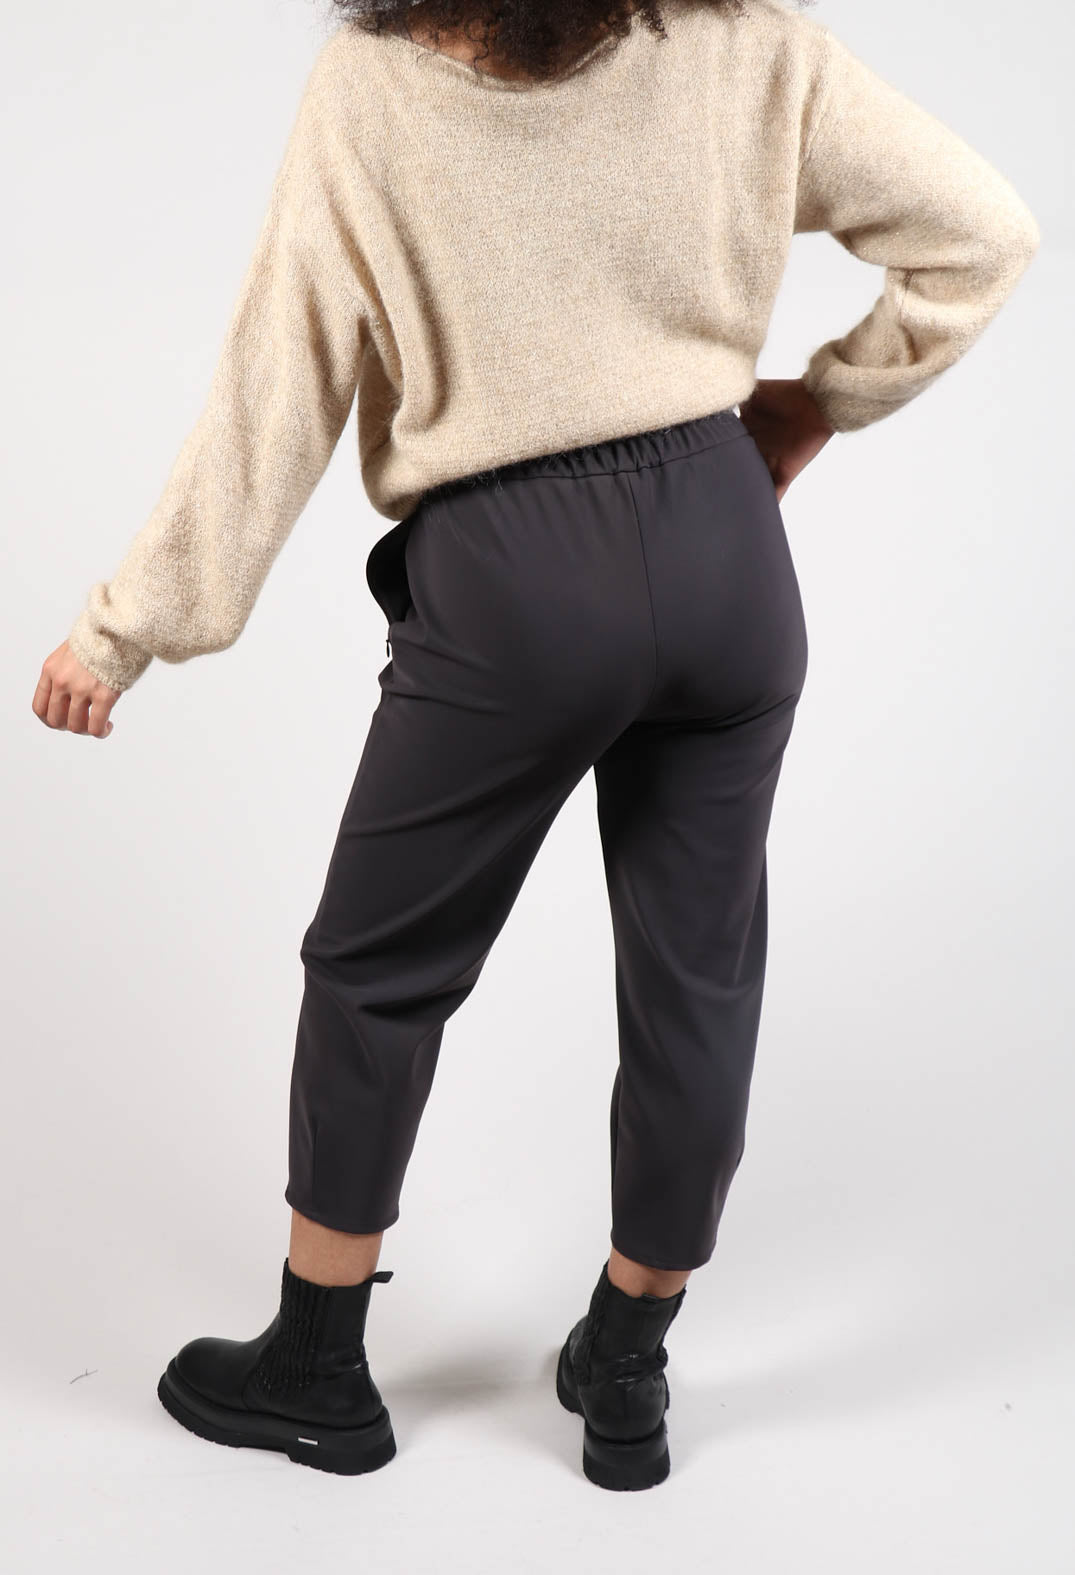 Straight Leg Trousers in Grey